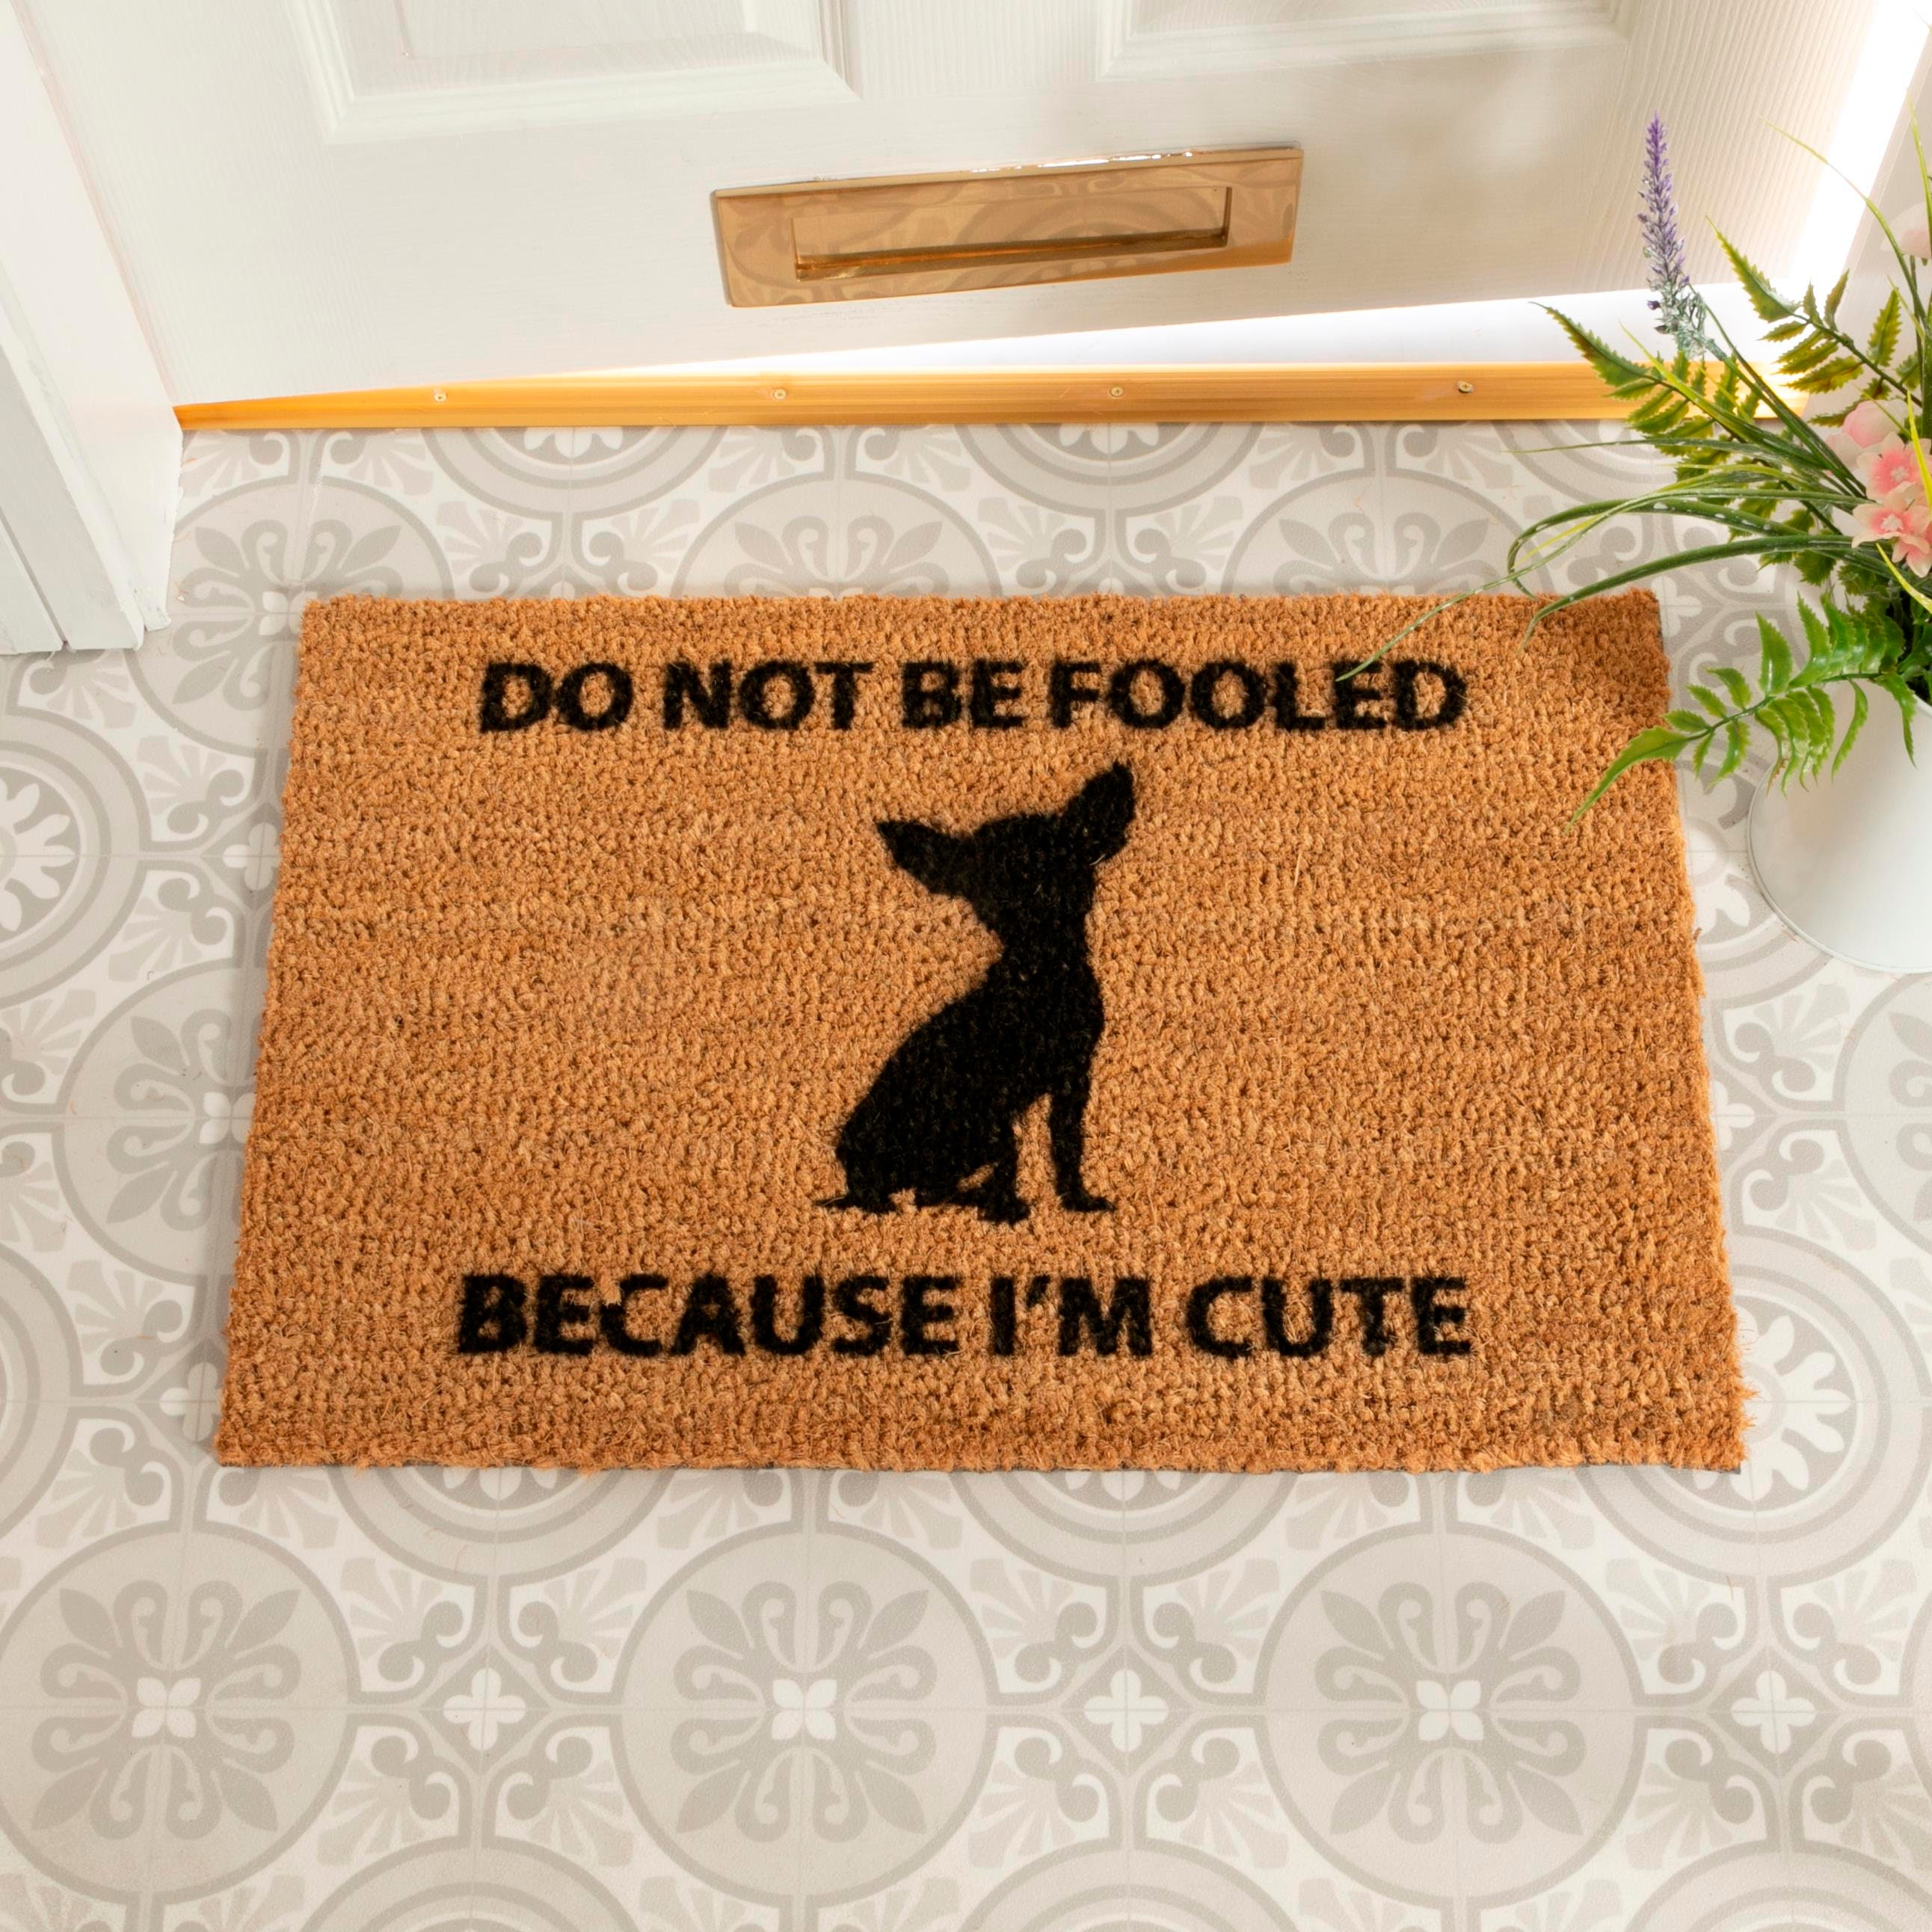 New Home Gifts Warning Chihuahua 24-Hour Surveillance Funny Pet Home Doormat 